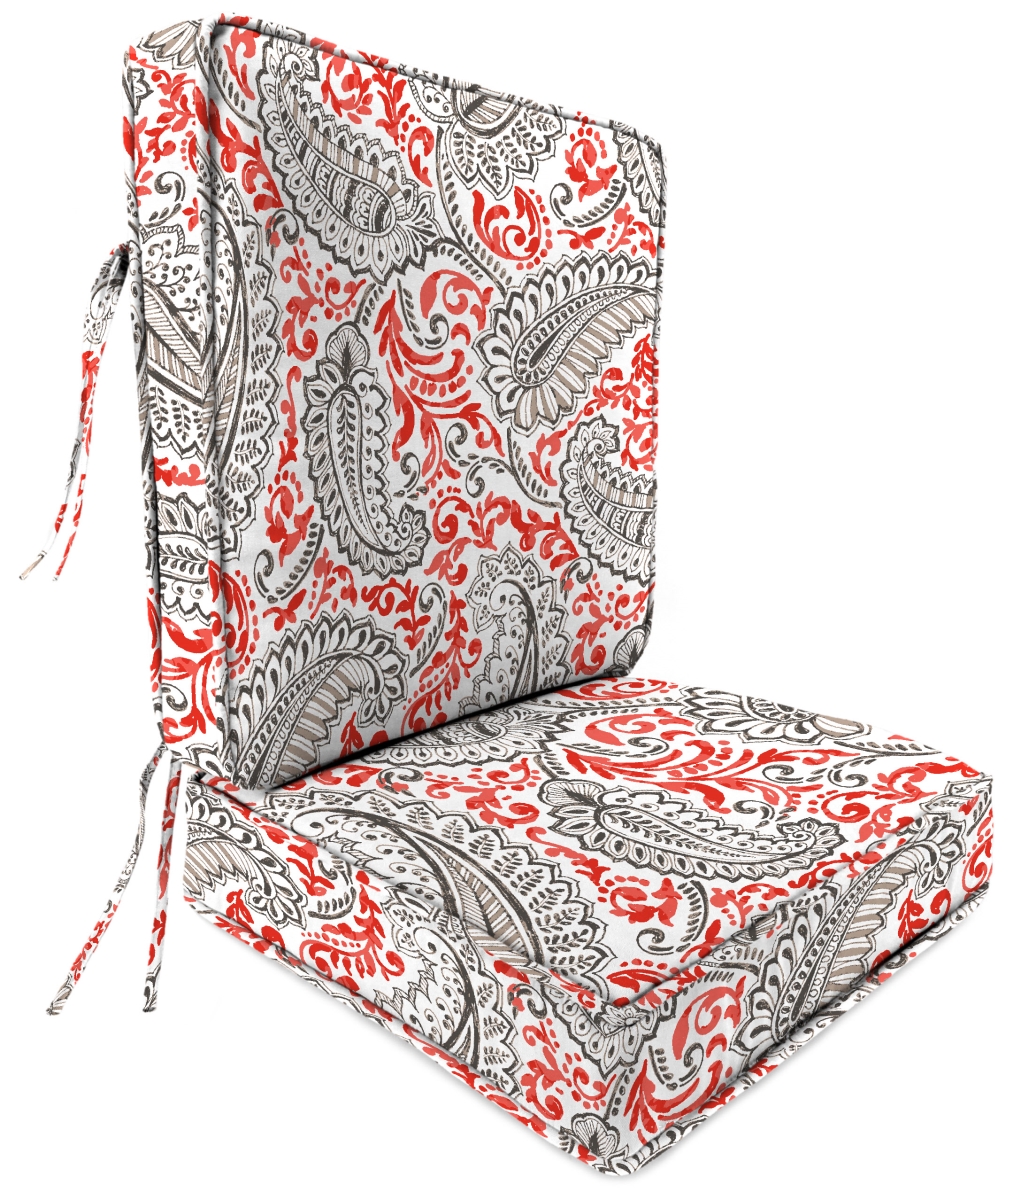 9746pk1-4264d Deep Seat Chair Cushion In Shannon Indian Coral - 2 Piece